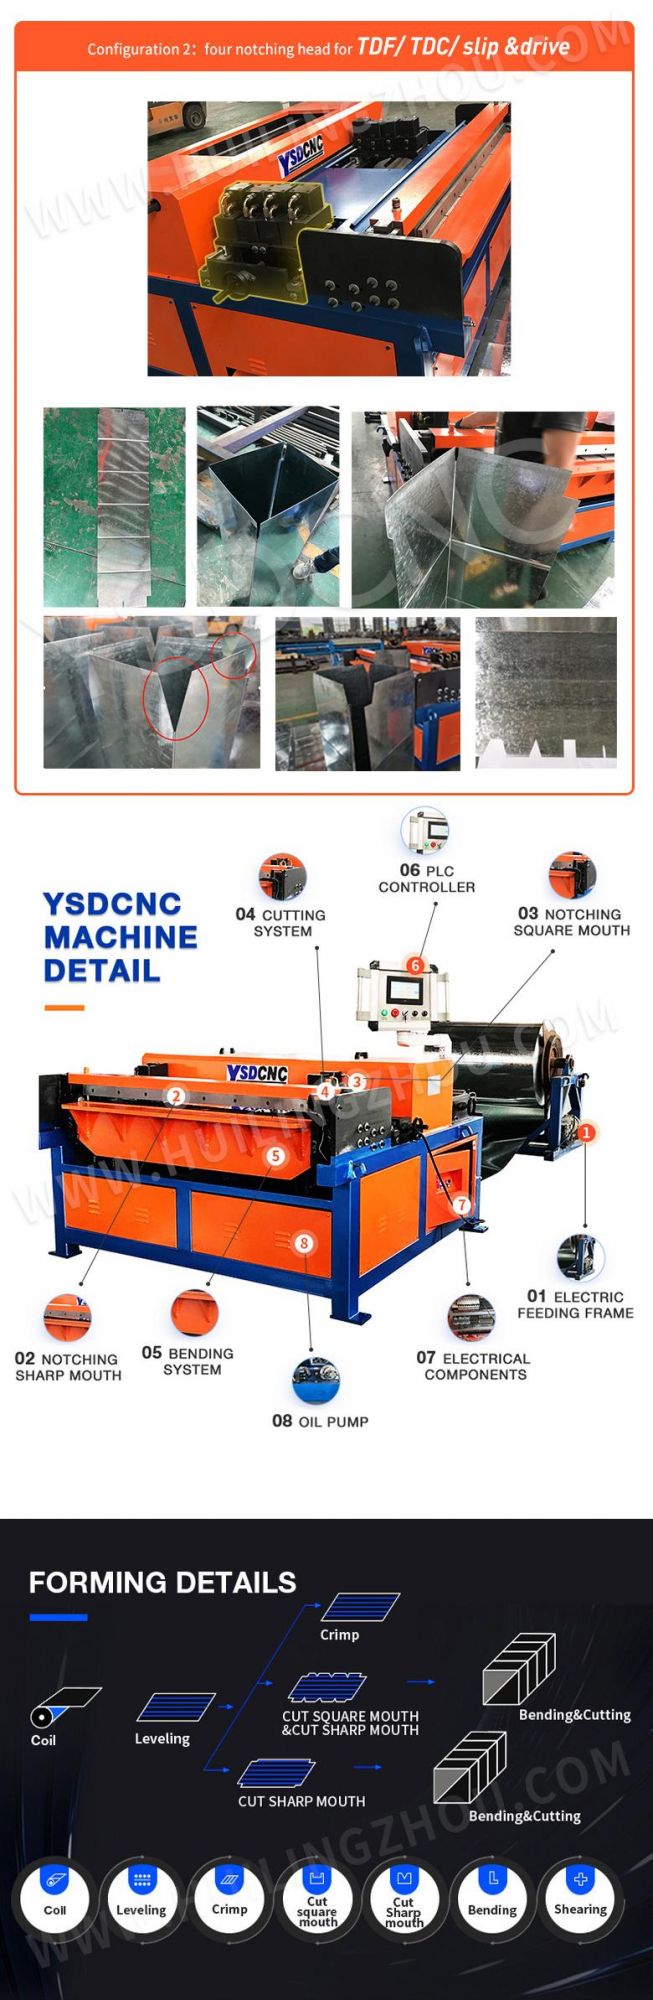 Ventilation Rectangular Air Duct Processing Machine /Auto Square Duct Line 3 with High-Productivity